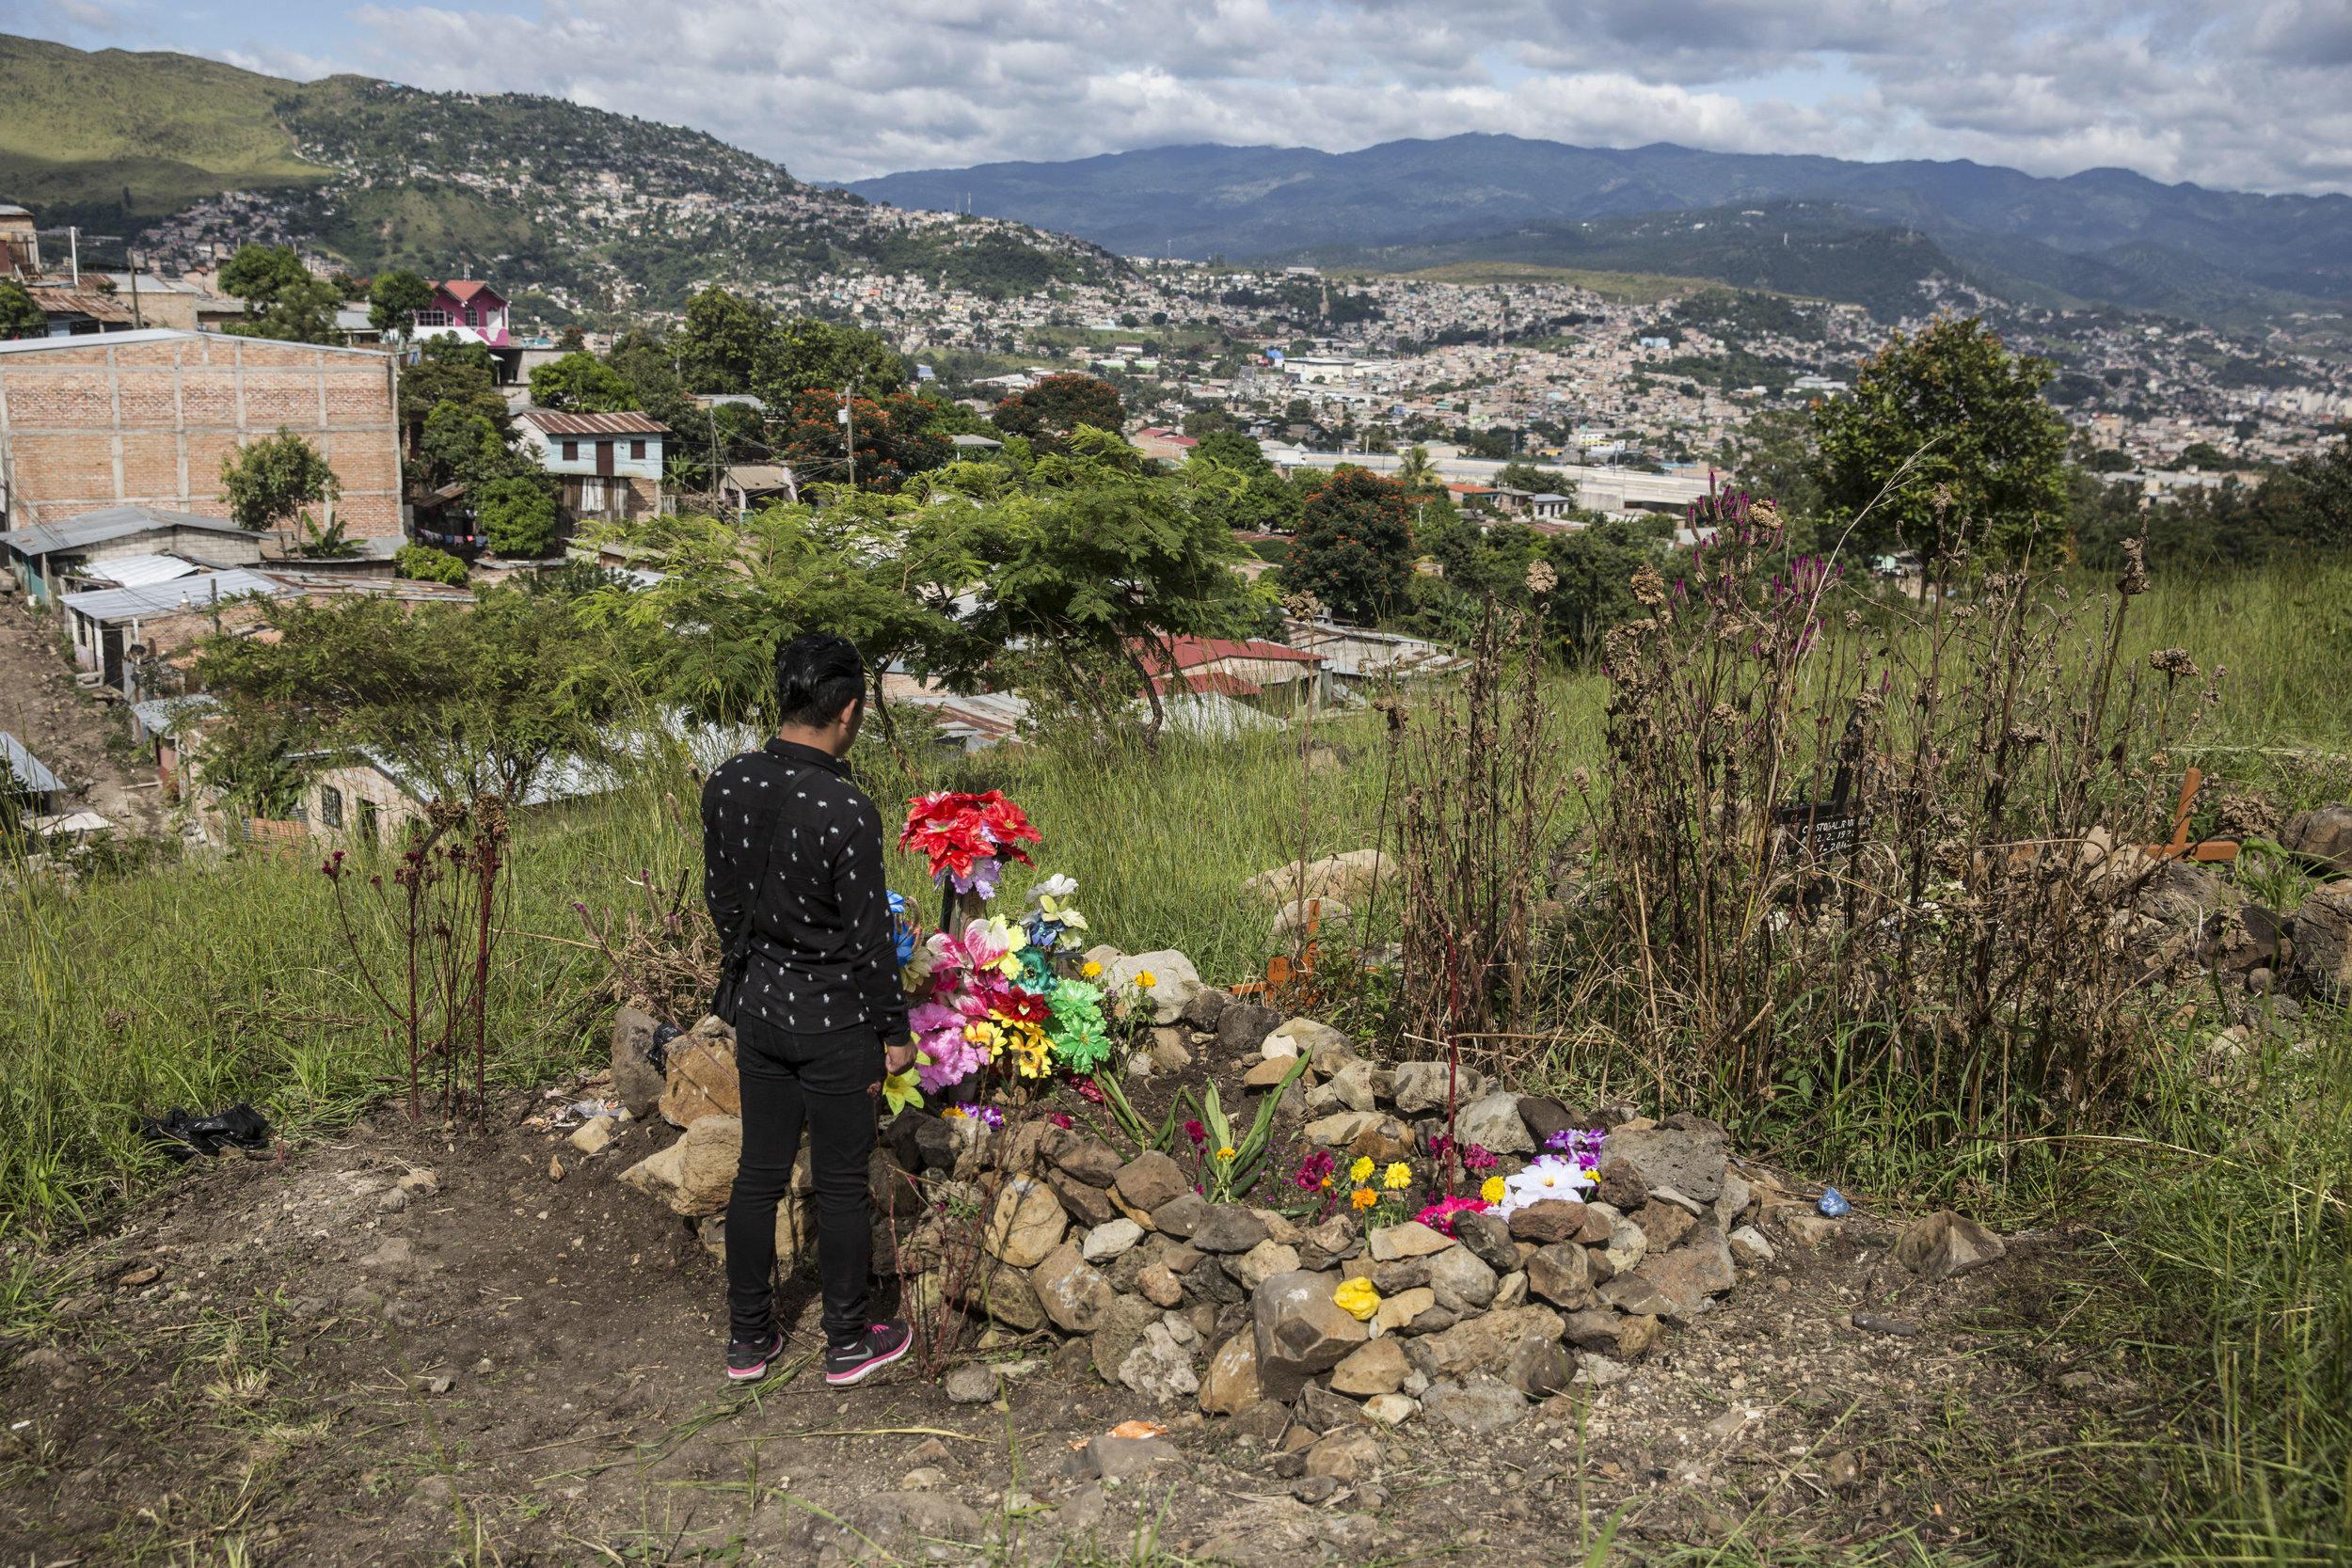  Darwin at his brother's grave overlooking Tegucigalpa, the capital of Honduras. Darwin is not safe, he has been threaten by the same gang that murdered his brother. In 2017, there have been 34 murders of LGBT community members in Honduras, according